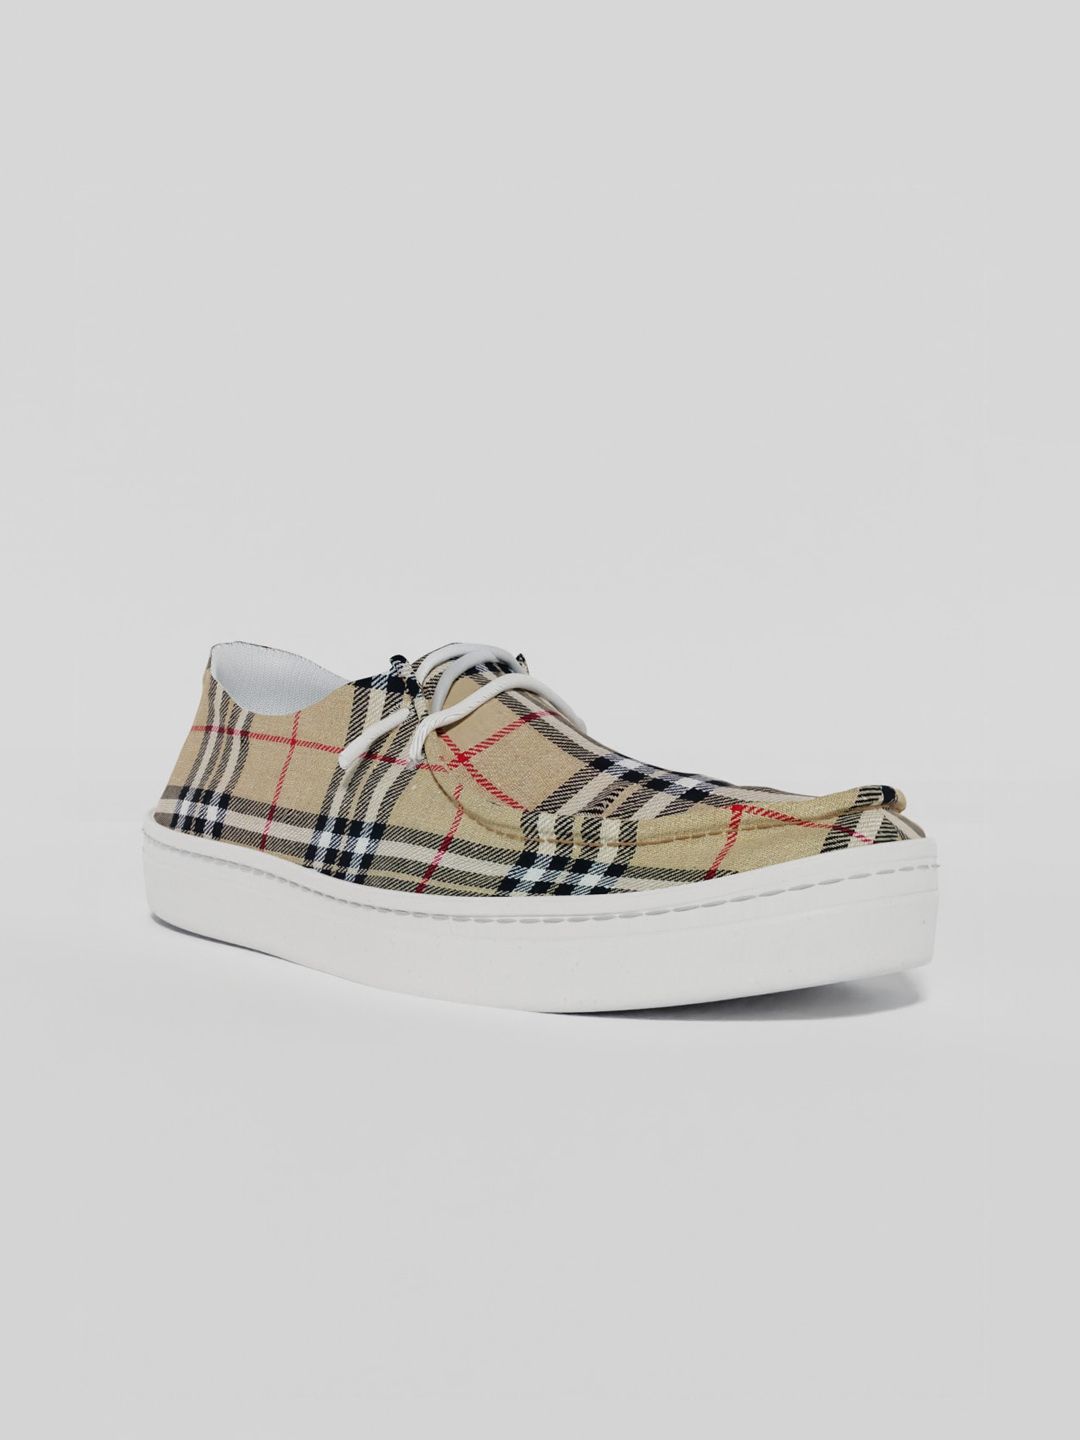 LOKAIT The Sneakers Company Women Beige Striped Slip-On Sneakers Price in India